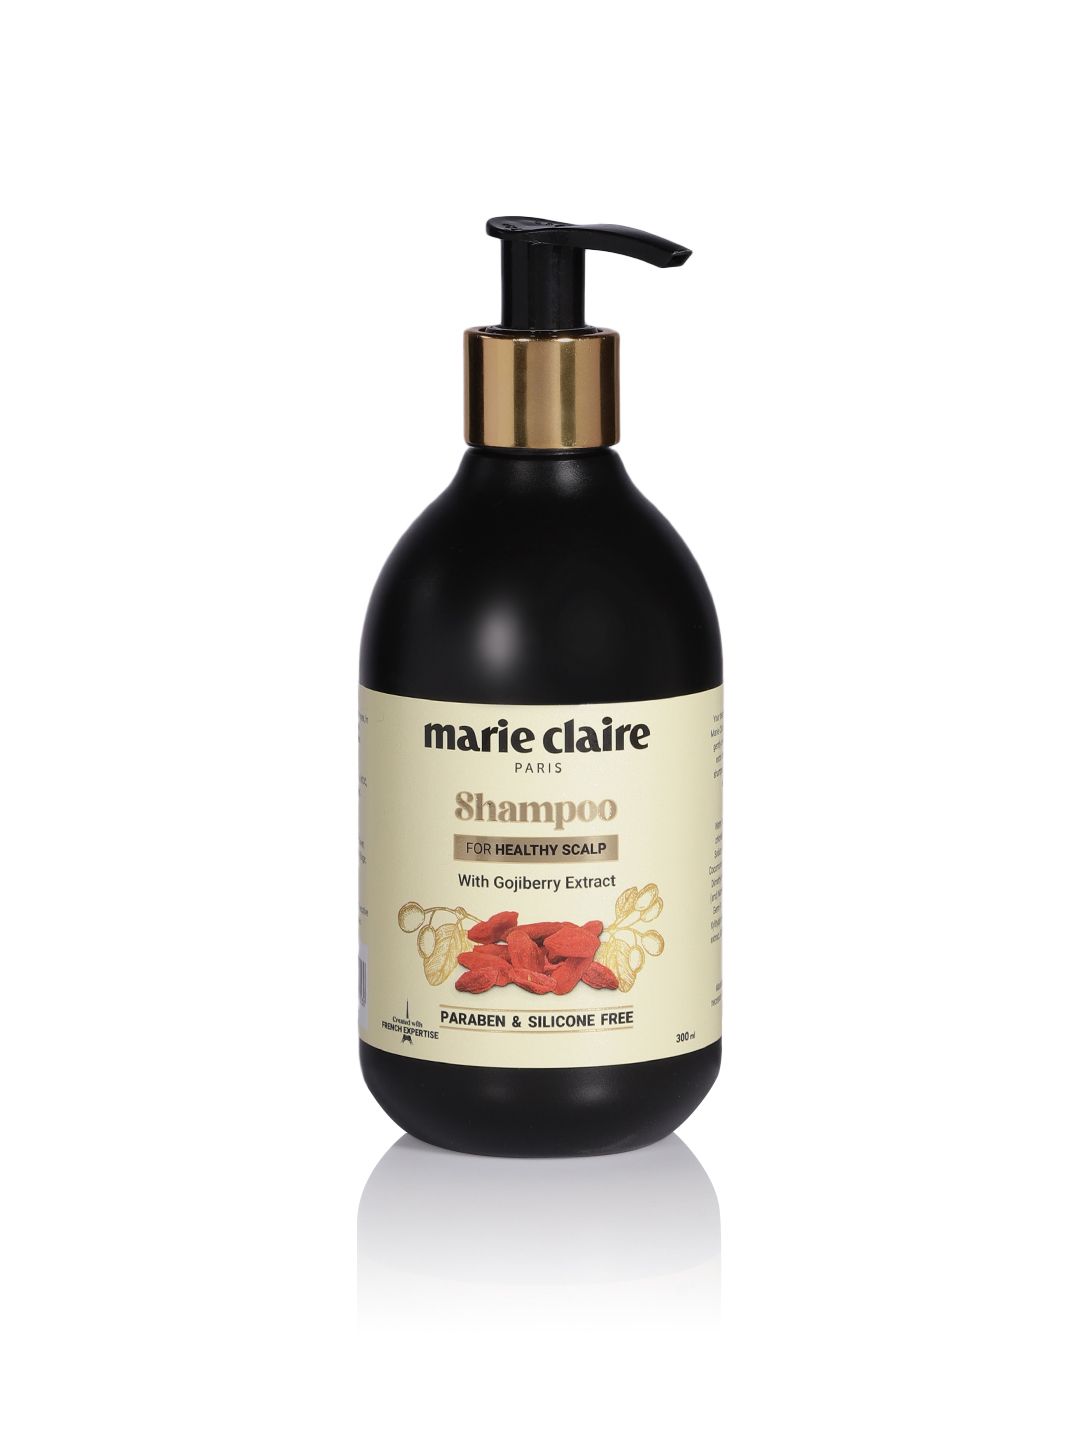 Marie Claire Paris Gojiberry Extract Shampoo for Healthy Scalp 300 ml Price in India